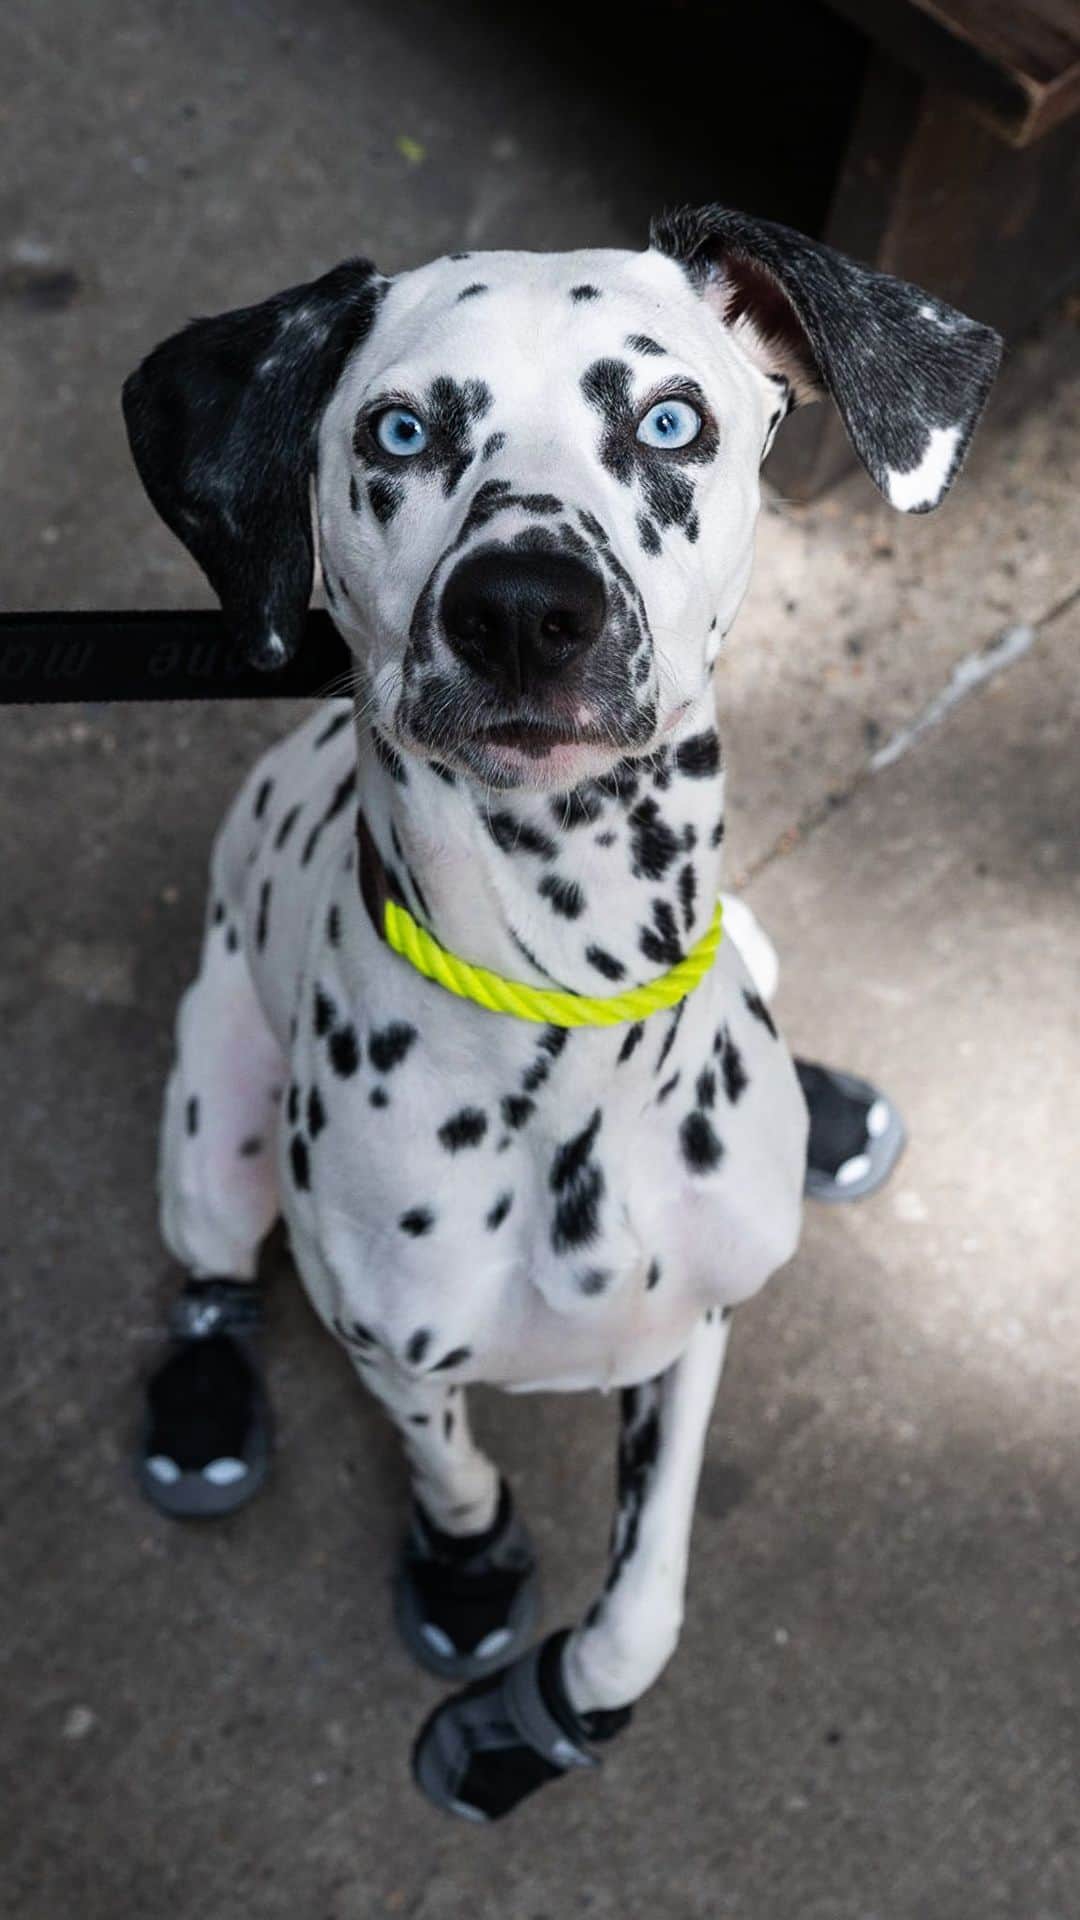 The Dogistのインスタグラム：「Navy, Dalmatian (7 m/o), Elizabeth & Bleecker St., New York, NY • “She’s not your typical Dalmatian; she’s very docile and gentle. They’re rambunctious and high-energy, and she’s very calm. She’s a velcro dog – she’s very clingy, which I didn’t expect. In the shower she needs to be near you, so she sits in the hamper.” @navyandema   Does your dog follow you into the bathroom?」